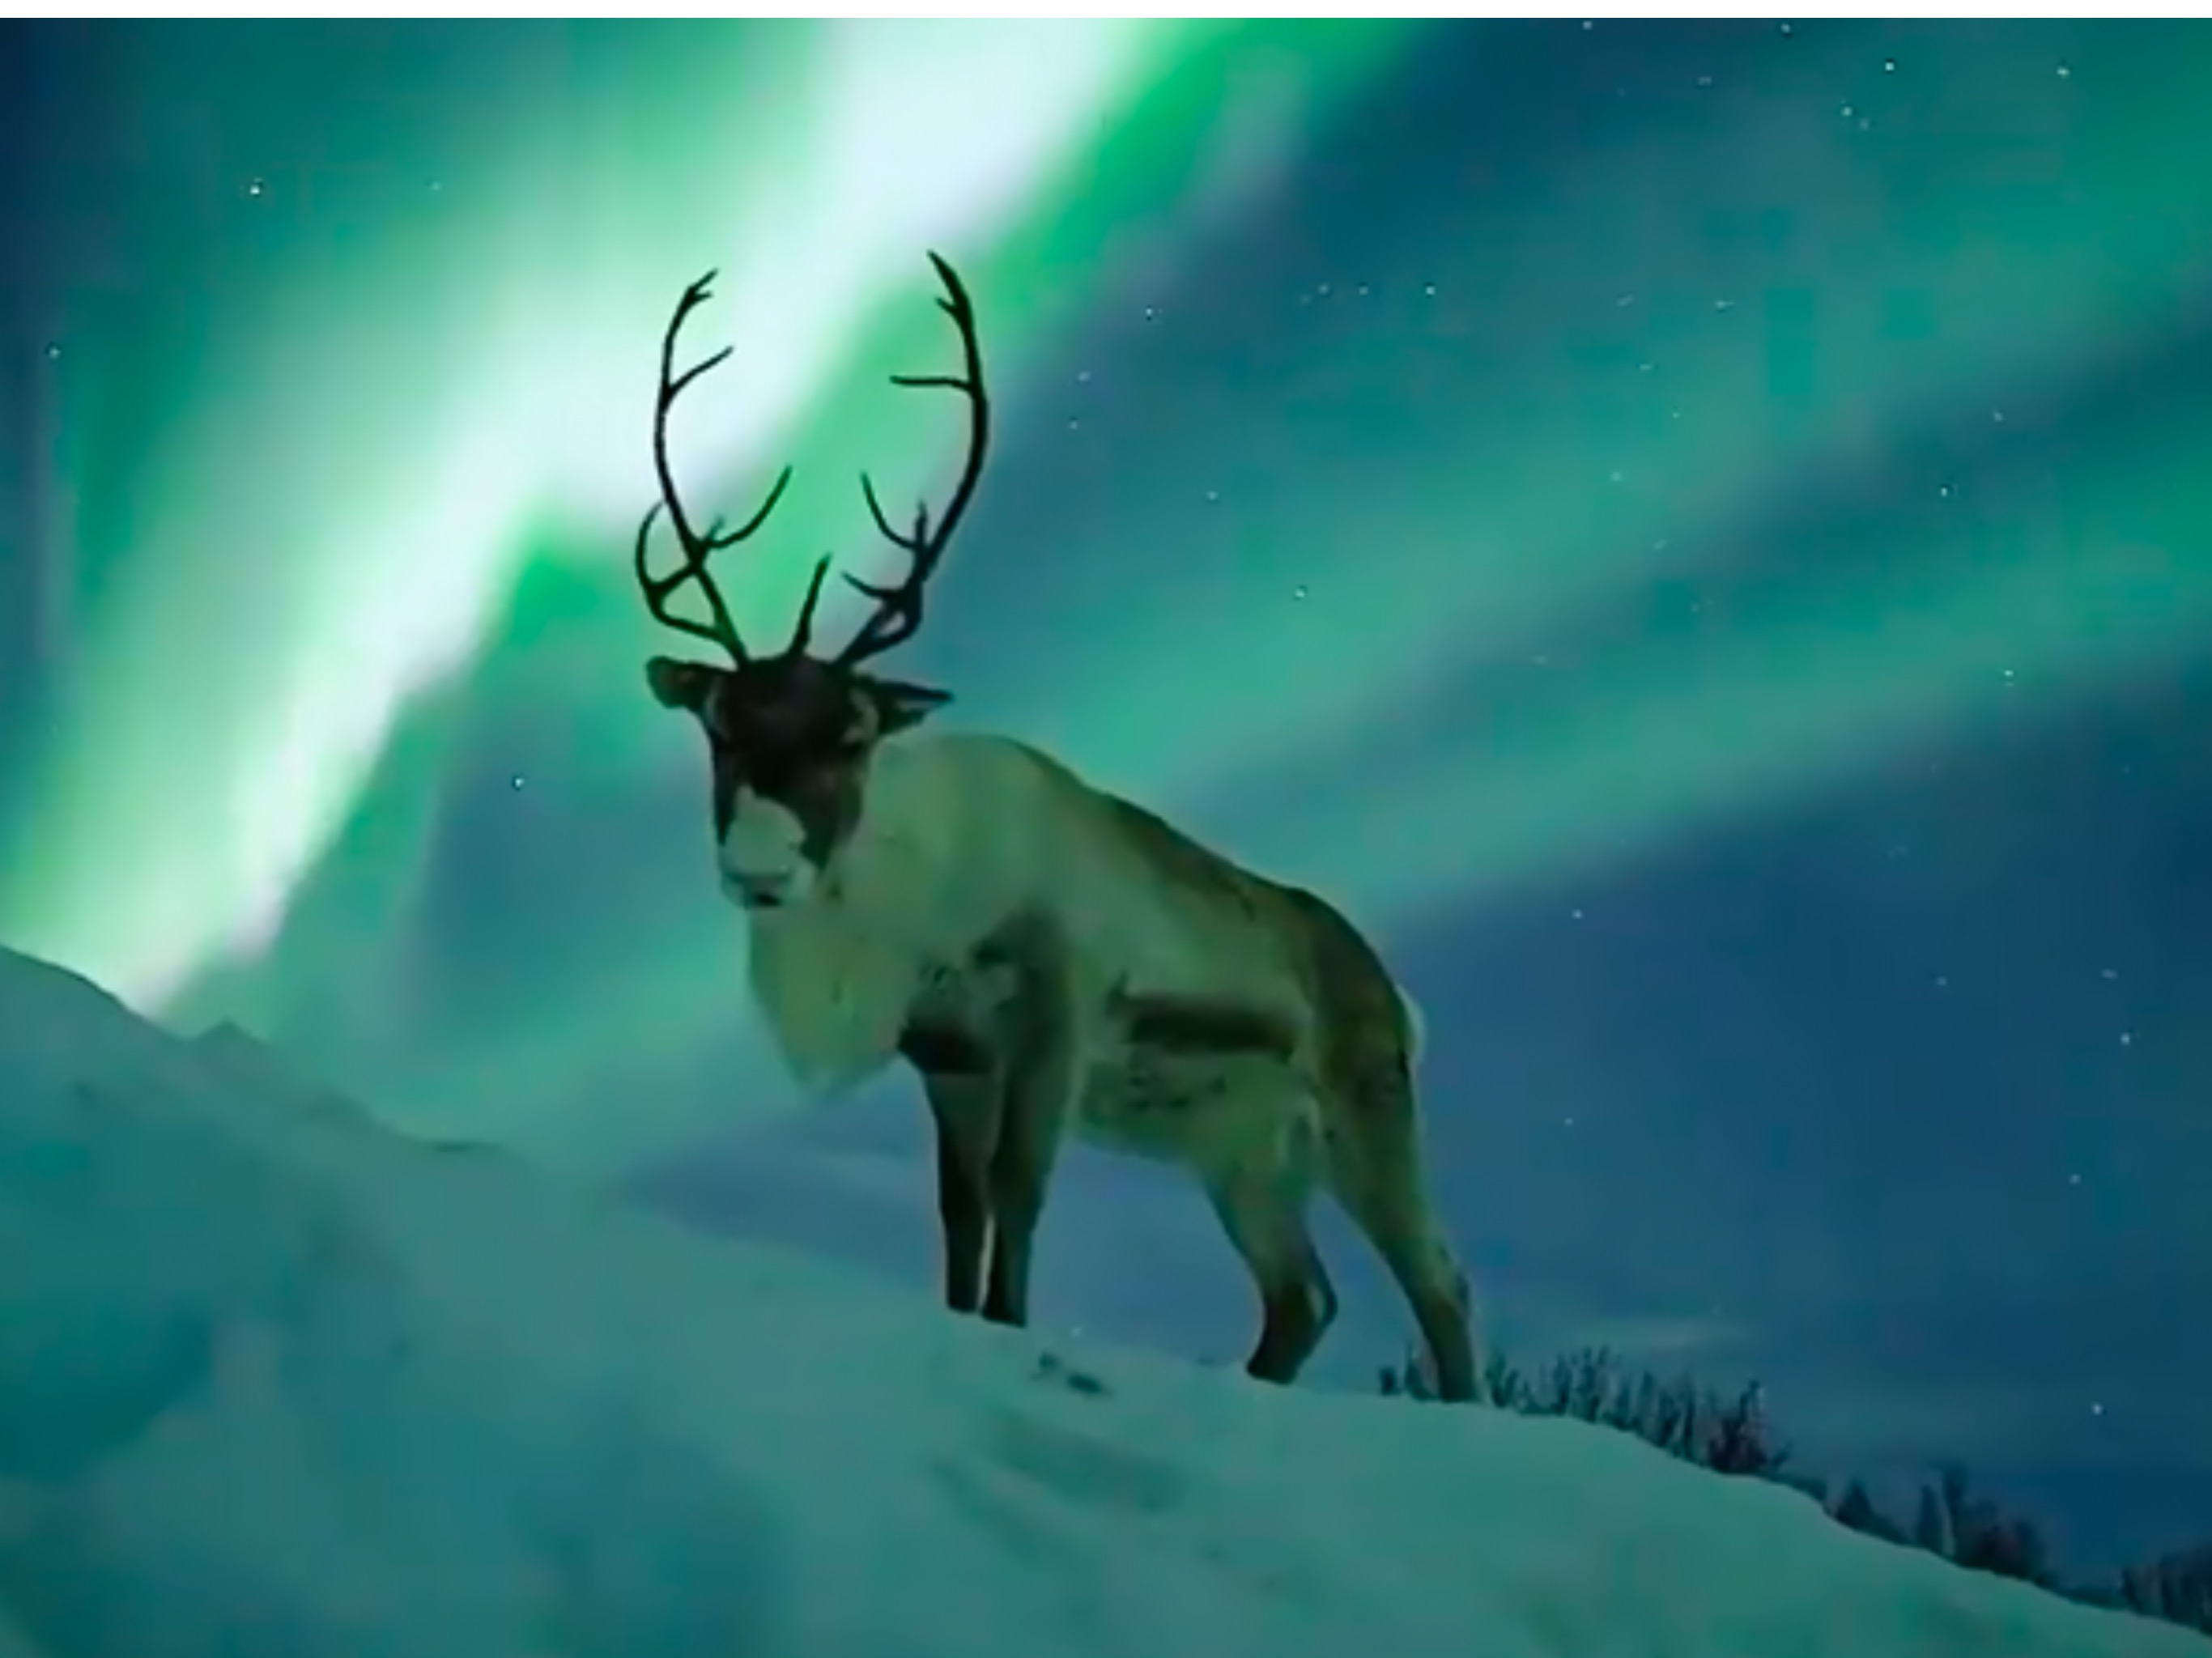 On Sunday 14 December (2020), Aurora Borealis Observatory uploaded a video to Facebook showing a reindeer, its magnificent antlers clearly visible against the backdrop of an electric-green night sky. For full details of this story, to watch the video, and see lots more stunning images, click source:?